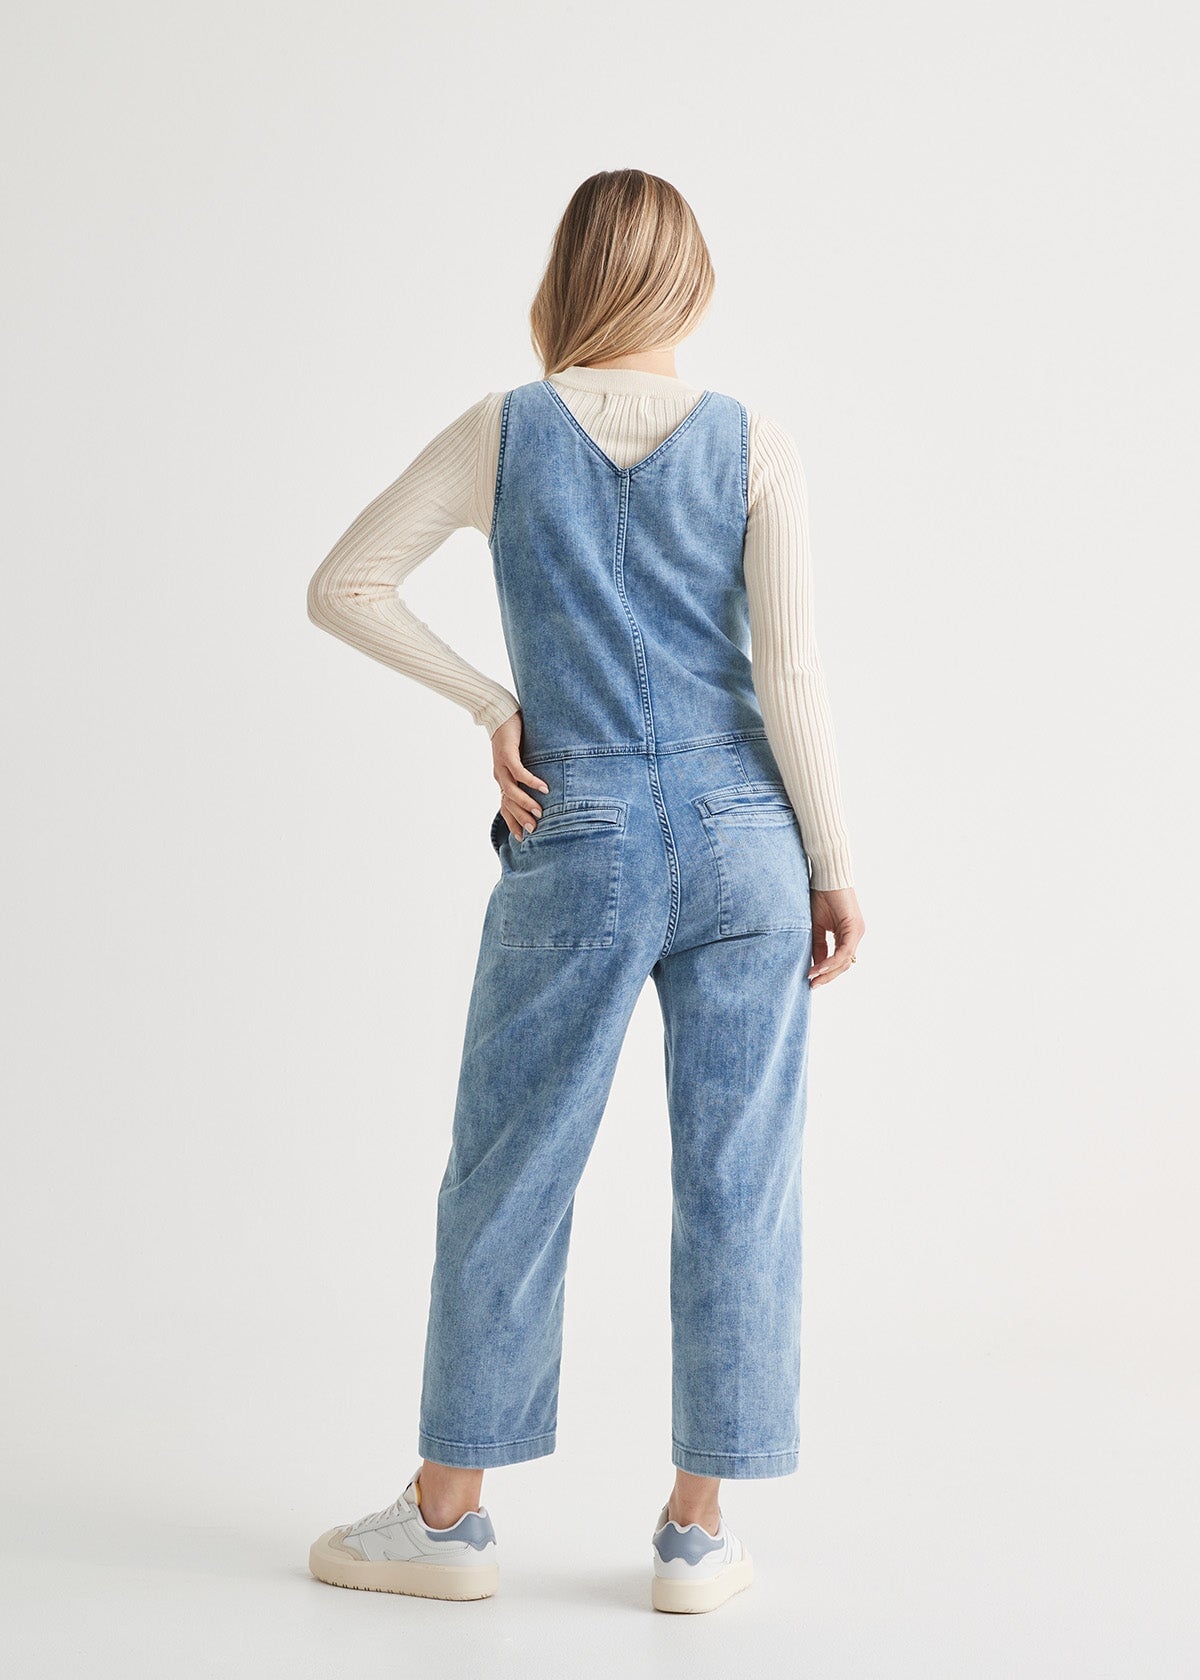 Women's Jeans Denim Jumpsuits Women Solid Basic Overalls BF Chic College  Woman High Street Lady Elegant Pants Jeans Long New Blue Fashion 2022 x0928